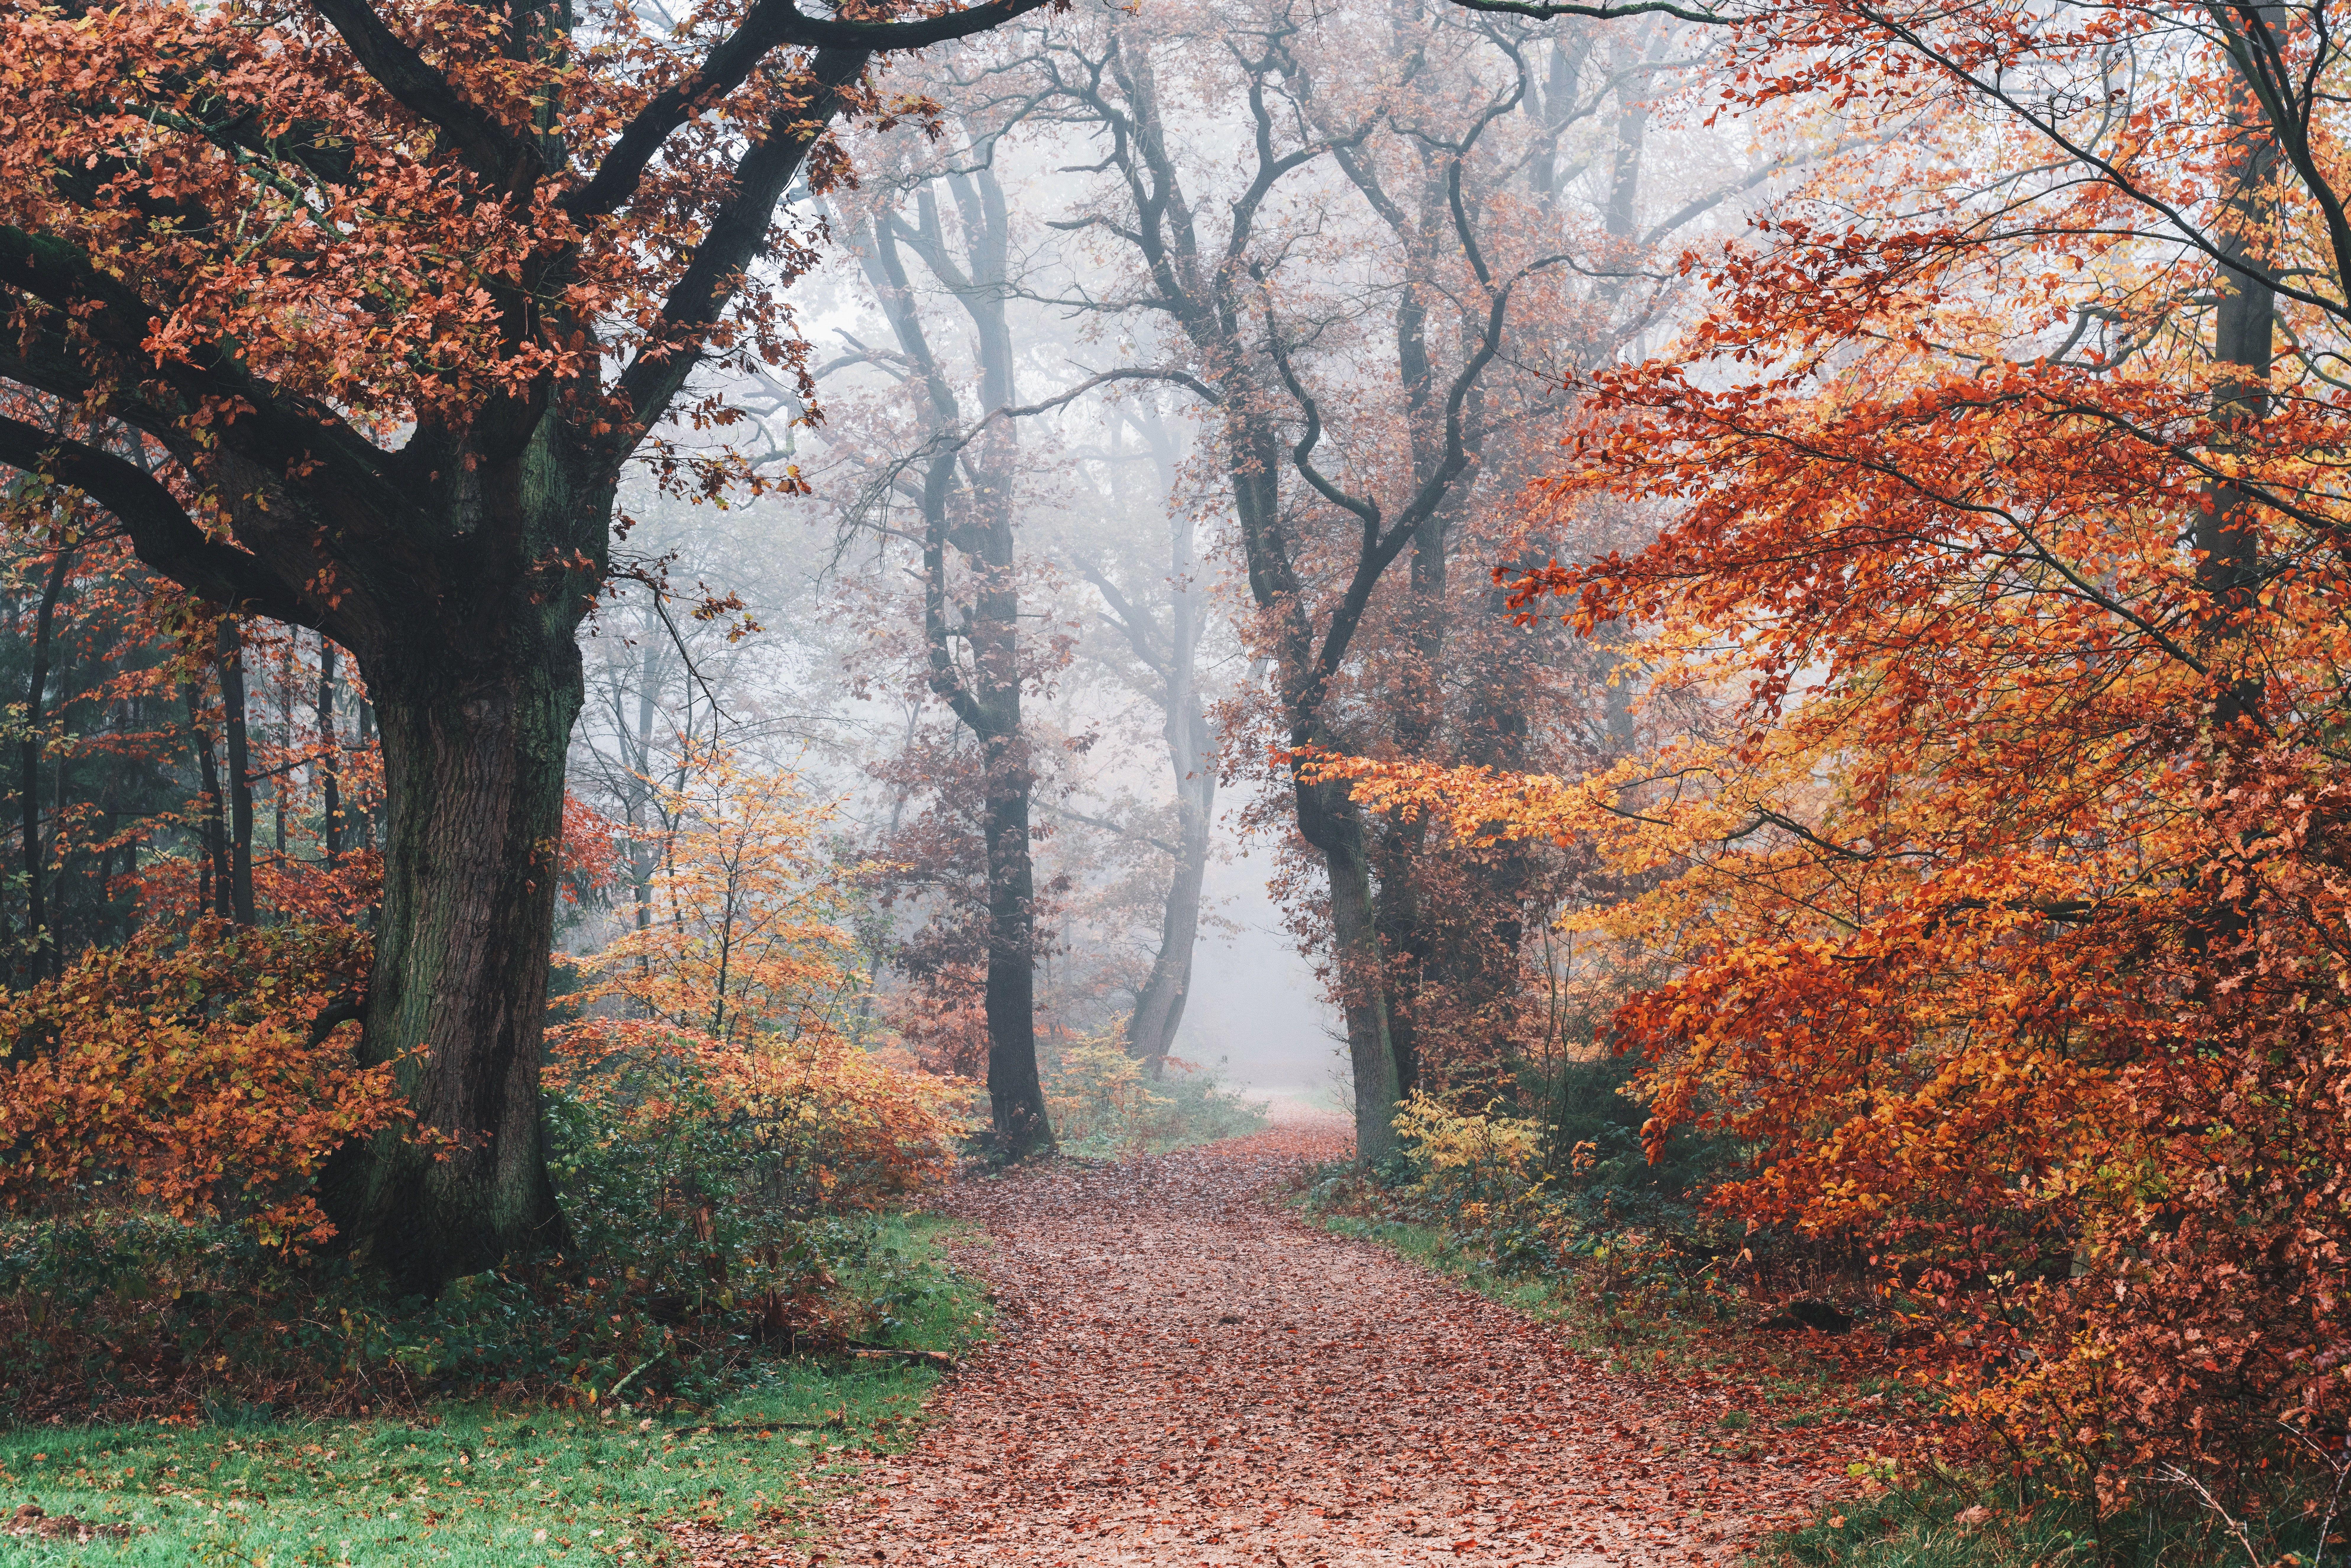 Autumn 4K Wallpaper, Forest, Fall Foliage, Trees, Foggy, Morning